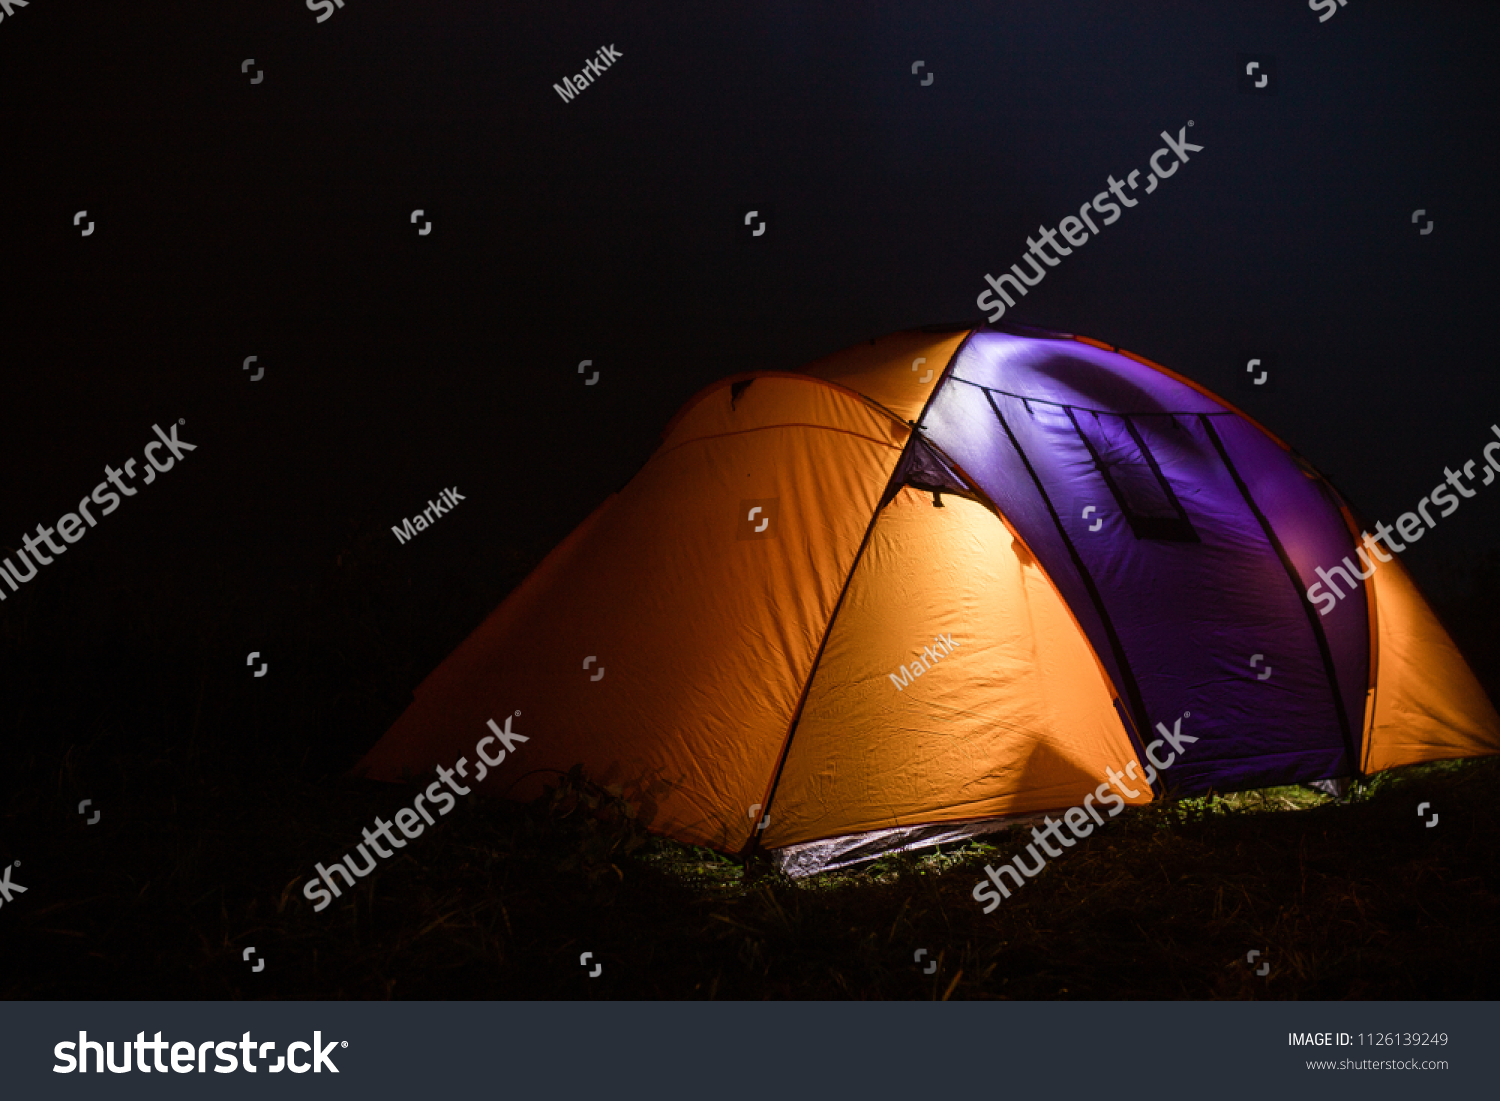 tourism, travel, tourism, tourism and the concept of active people's they, creating a tent in the open air. to collect a tent in nature.
Camping and tent under a pine forest at sunset. #1126139249